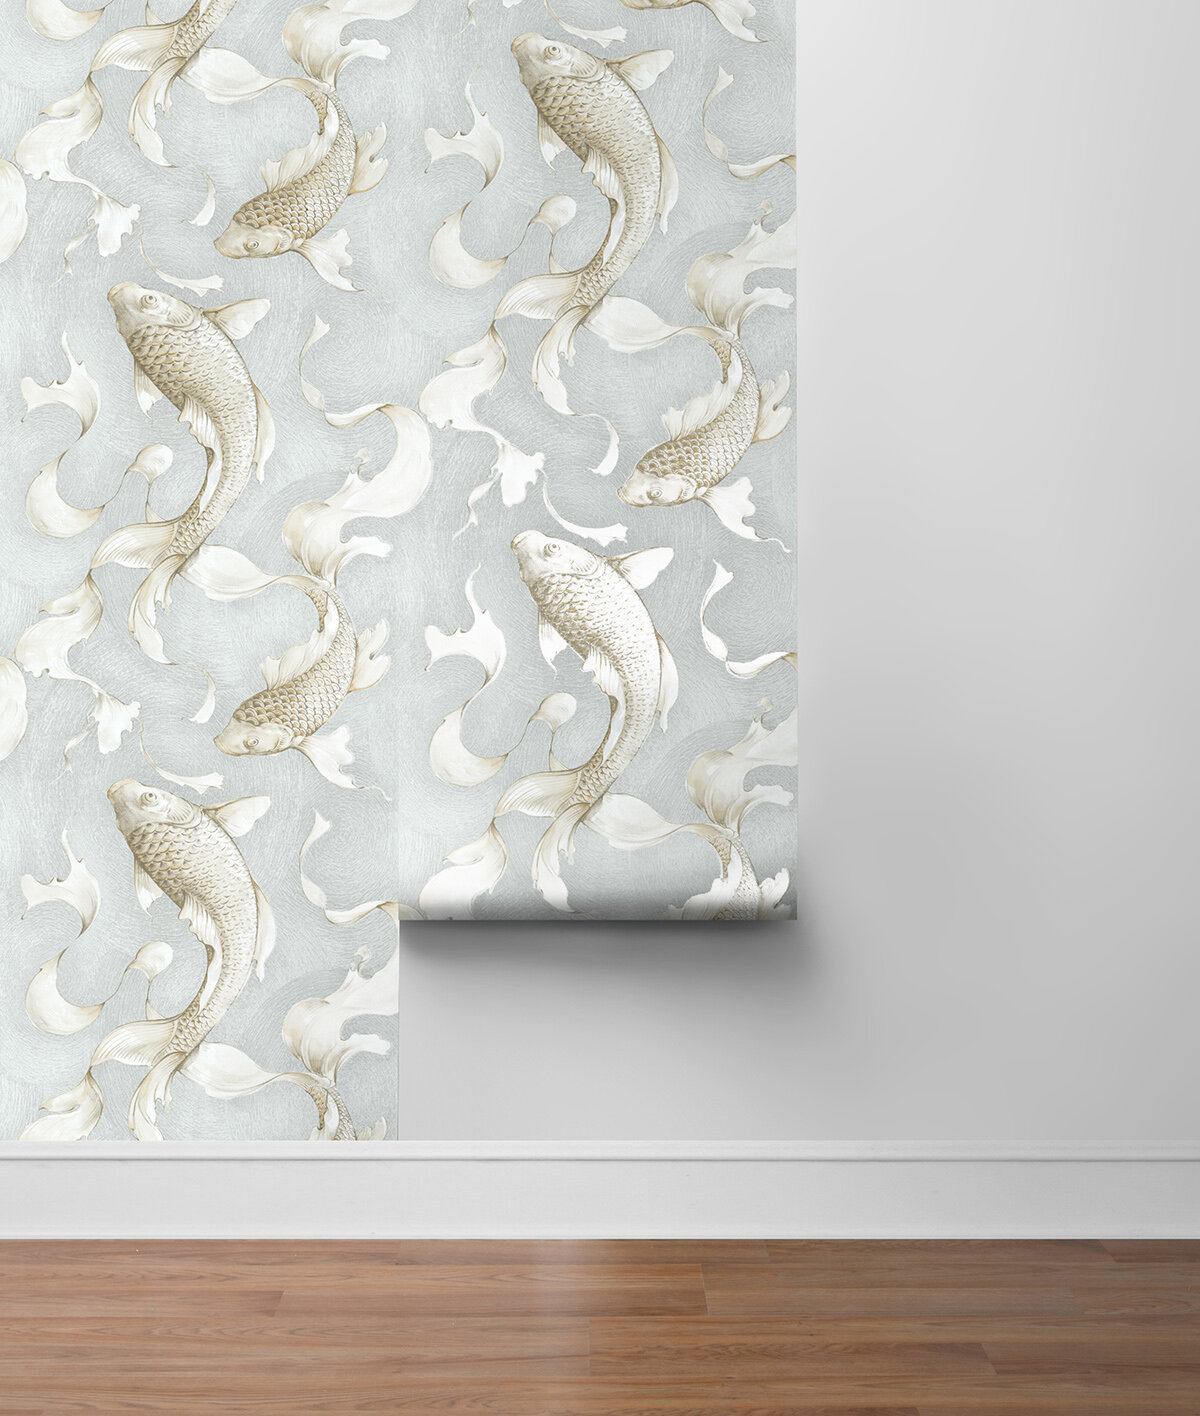 Peel and Stick Koi Fish Self Adhesive Removable Wallpaper 20.5" W x 18' L Roll 